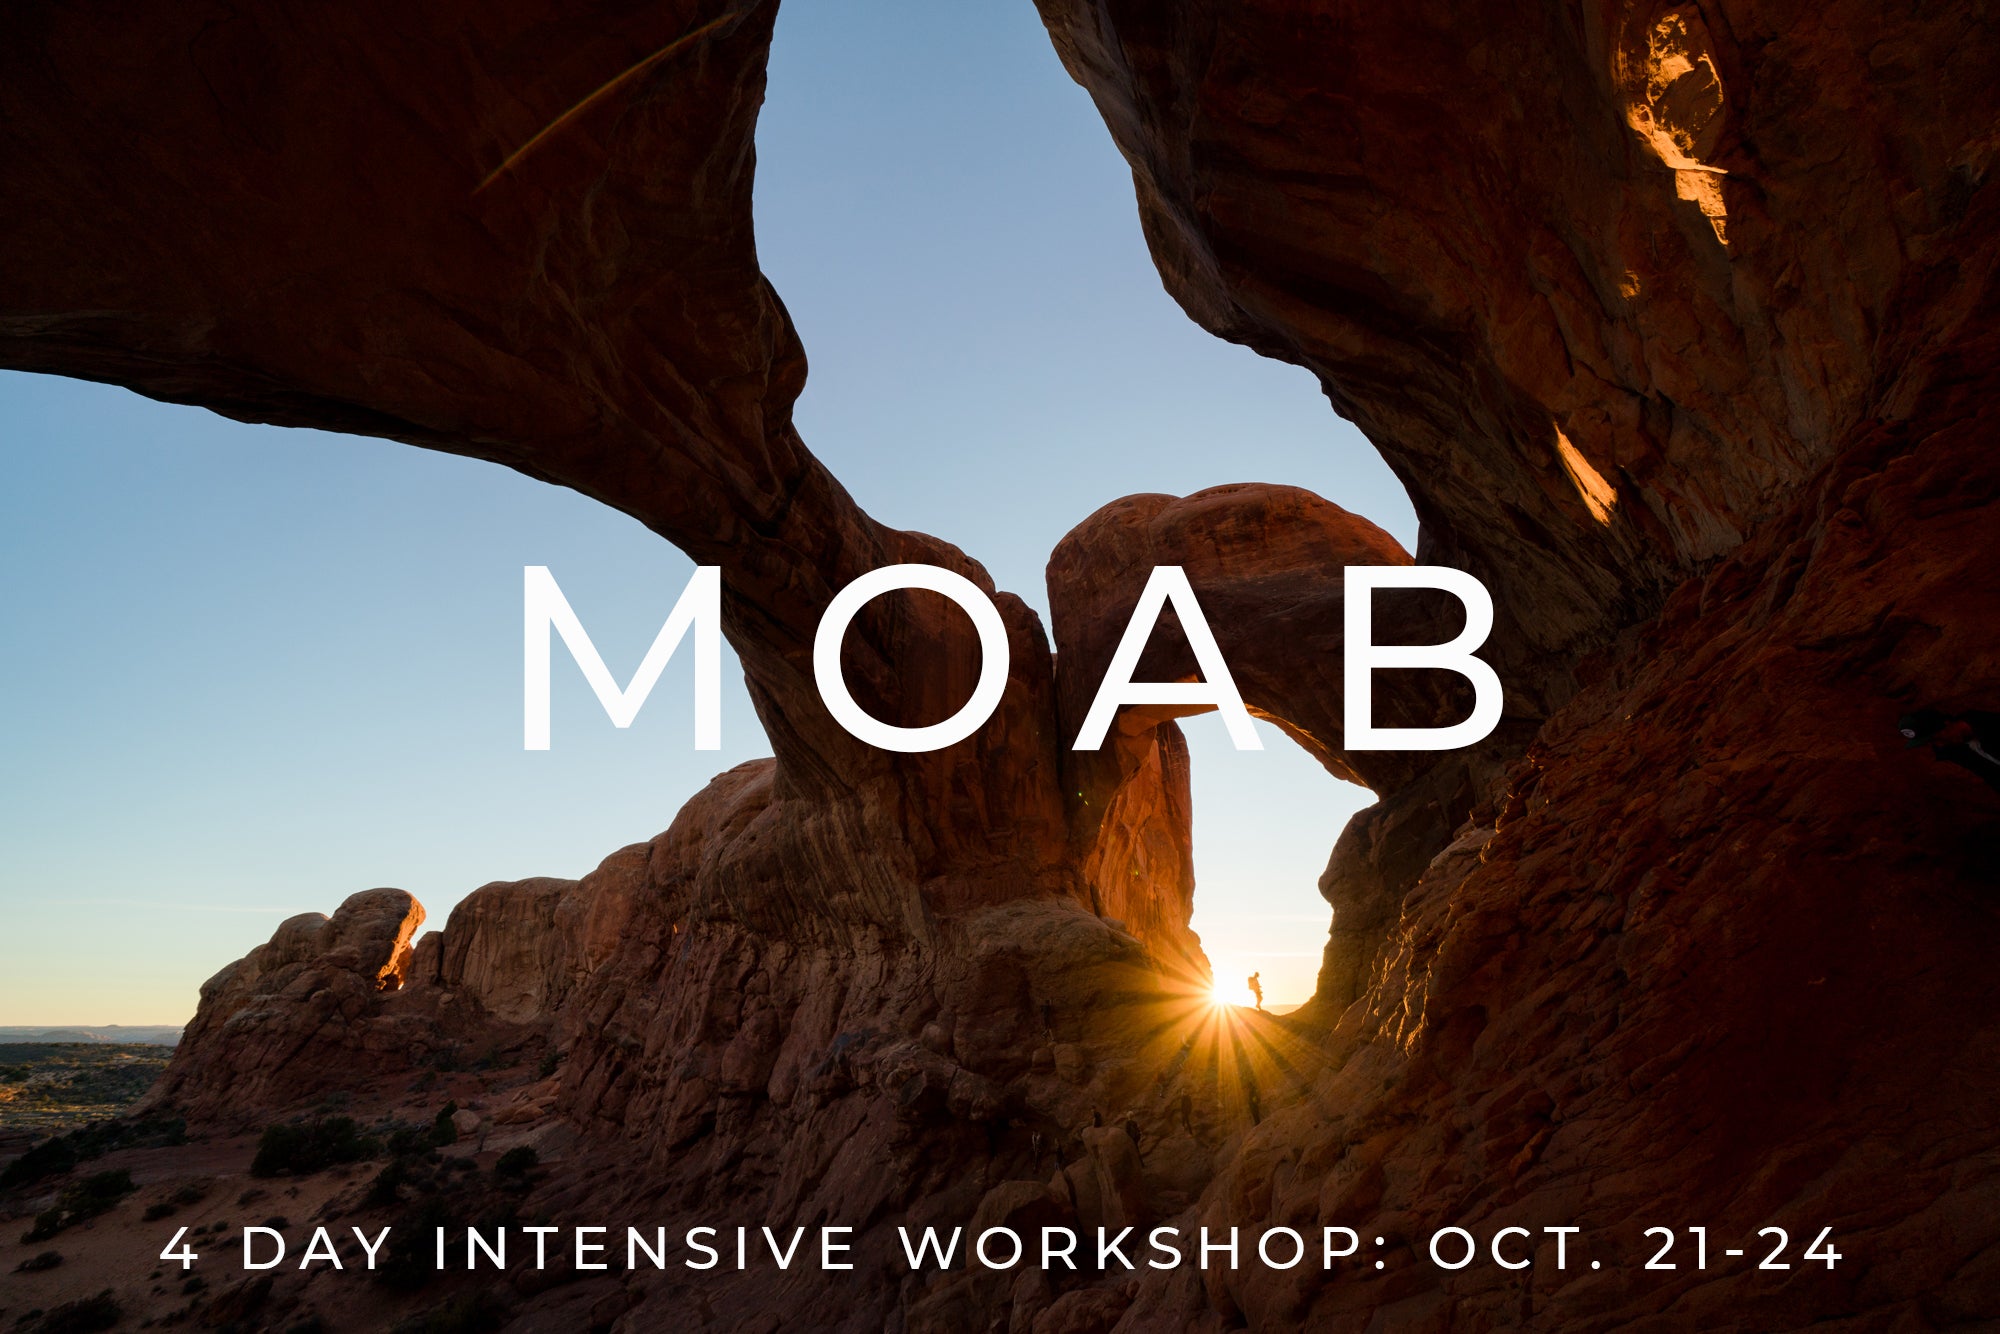 Moab Photography Workshop - Oct. 21-24 Final Payment